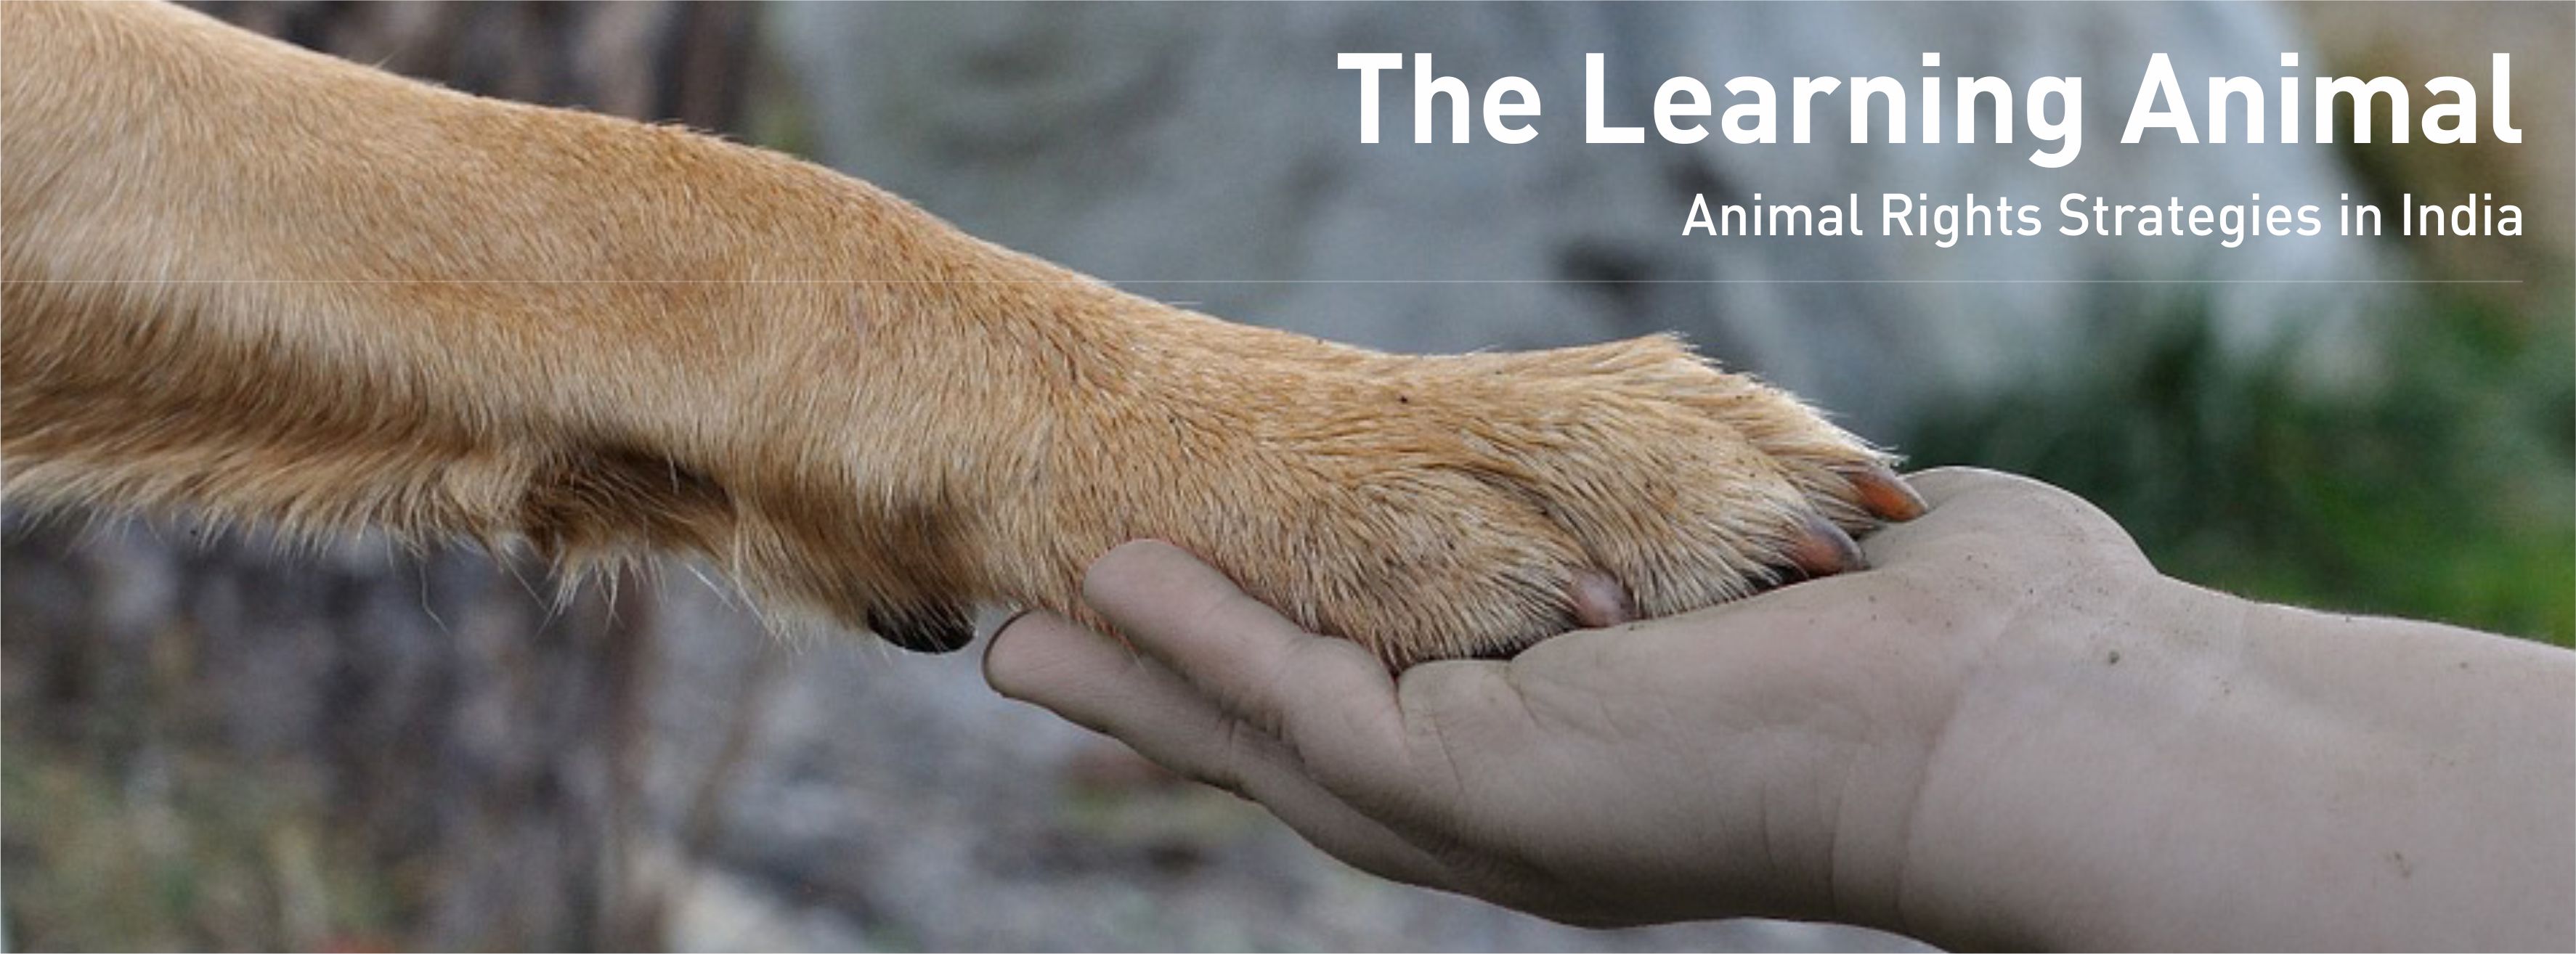 The Learning Animal - Federation of Indian Animal Protection Organisations